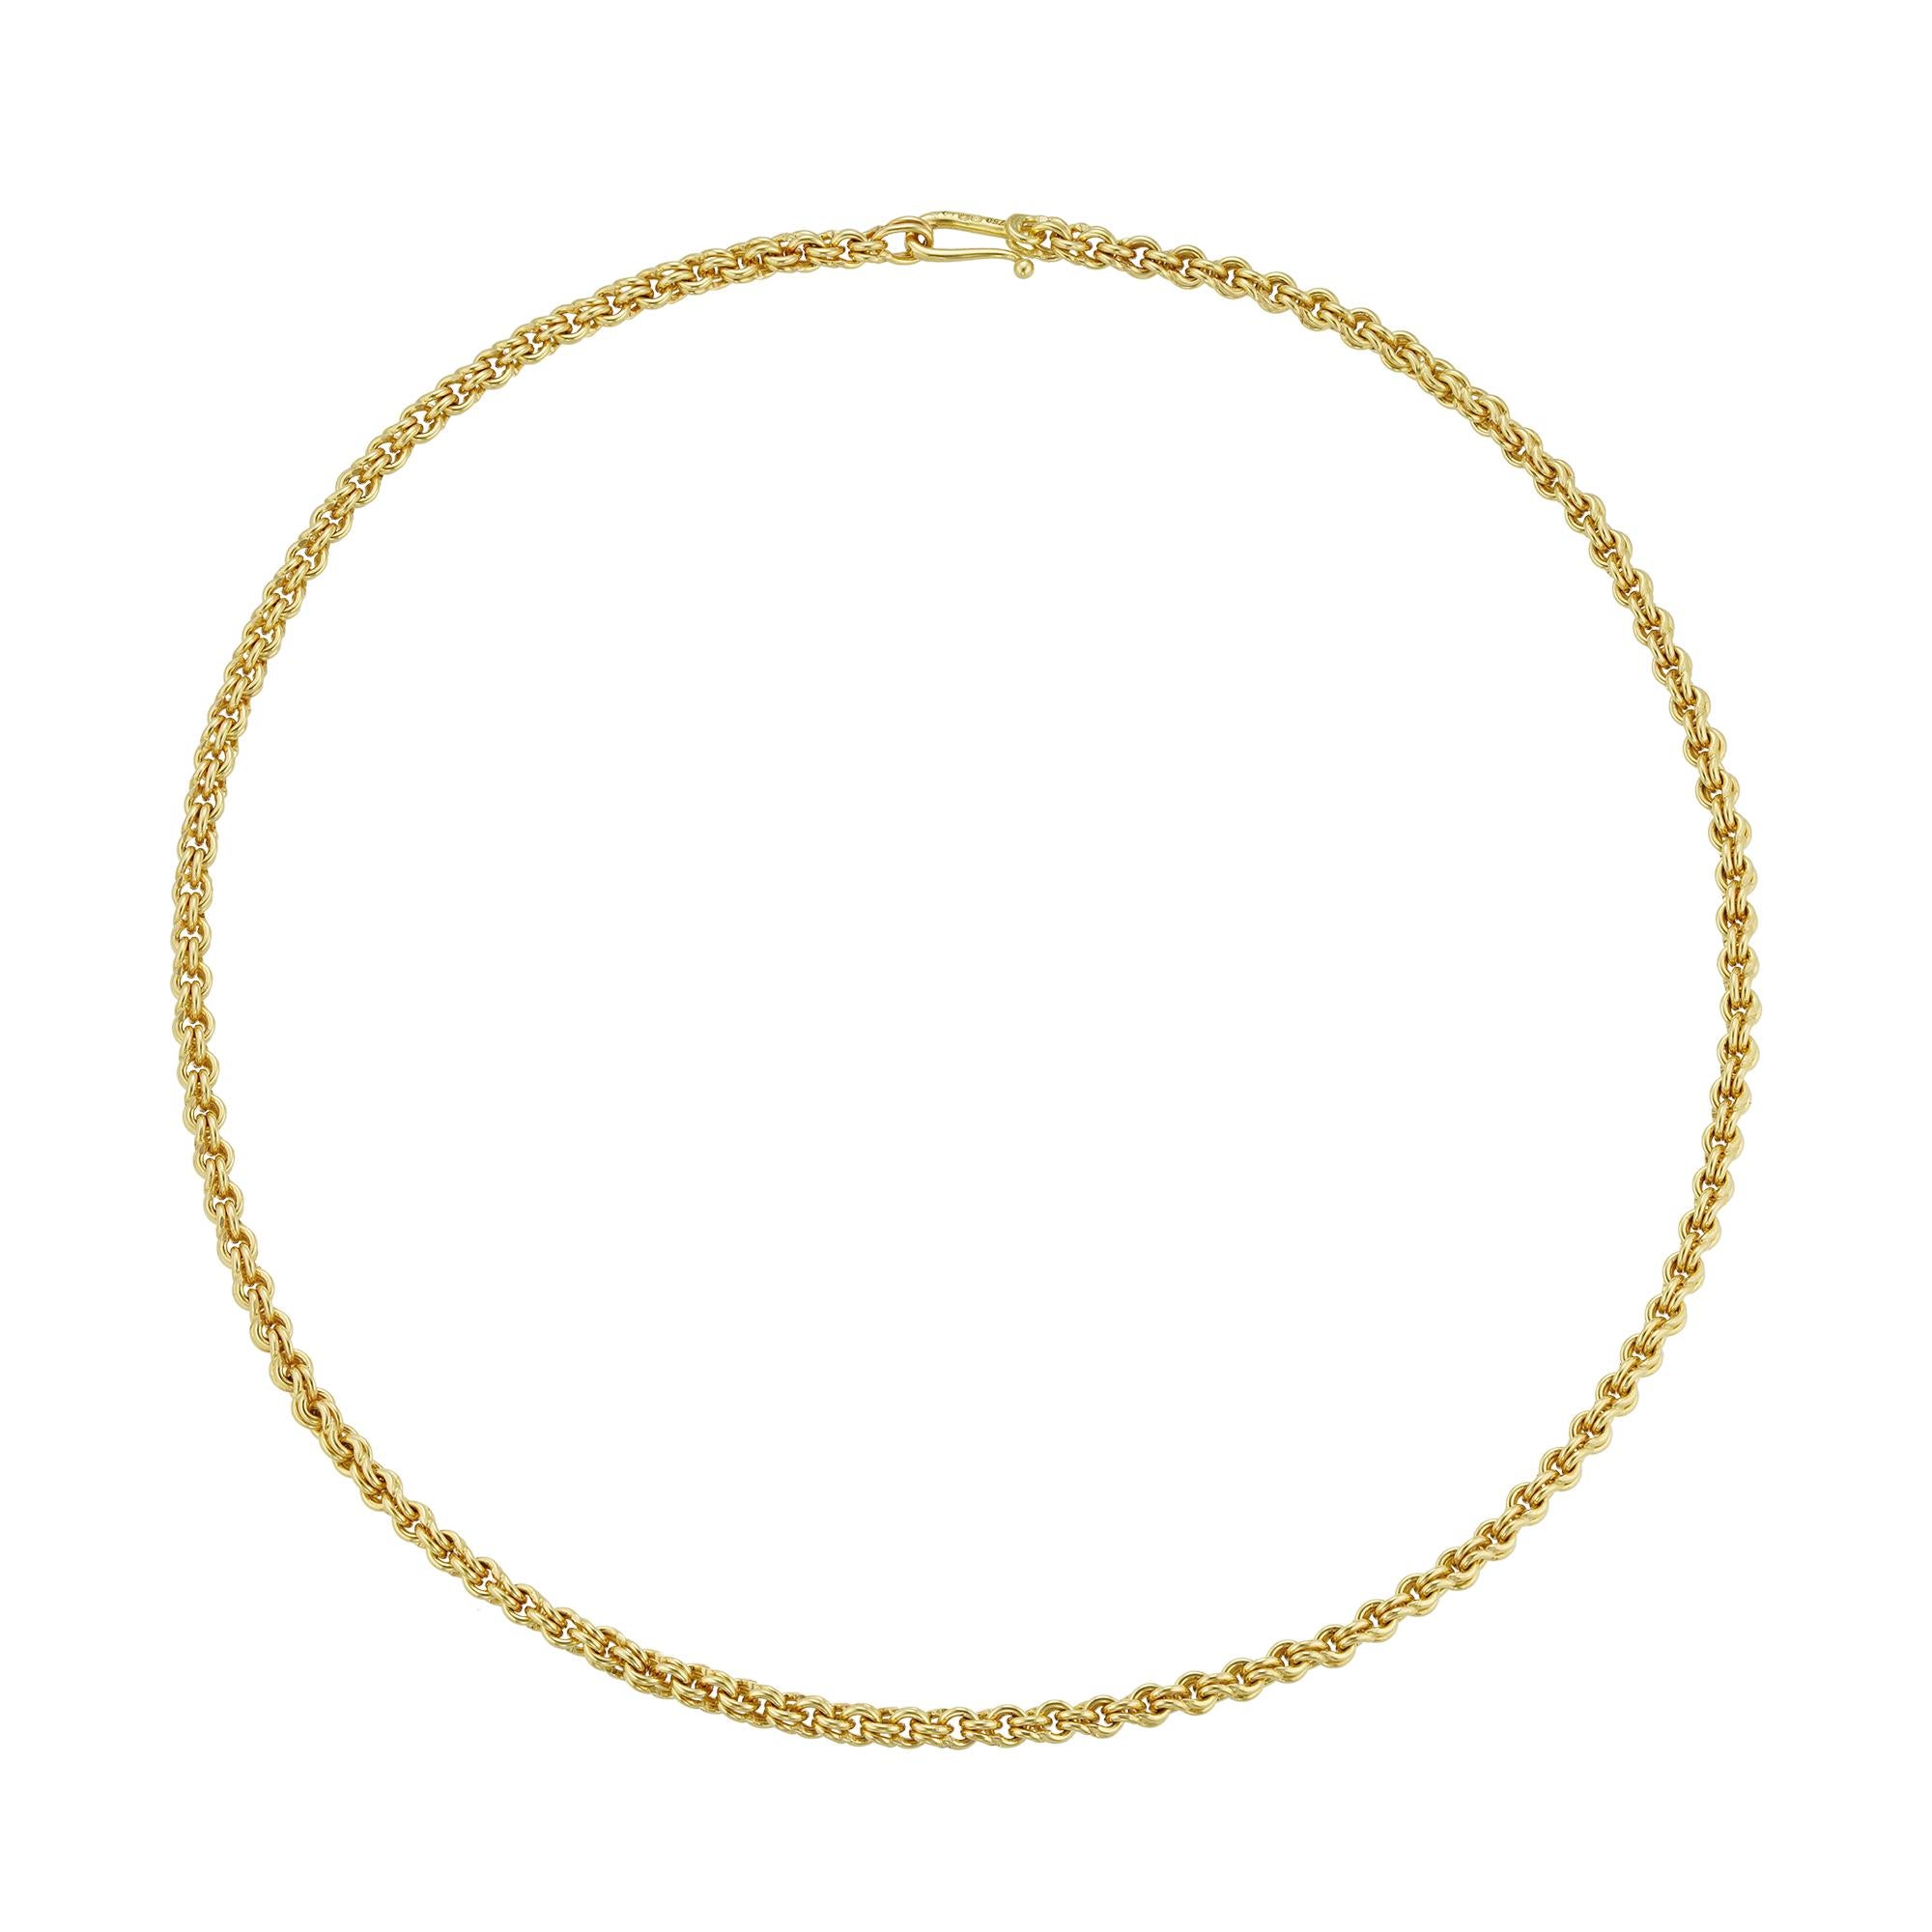 A handmade Minstrel gold necklace by Lucie Heskett-Brem the Gold Weaver of Lucerne, hallmarked 18ct gold, measuring approximately 45 x 0.4cm, gross weight 34.4 grams.

Should you choose to make this purchase we would be delighted to send it to you